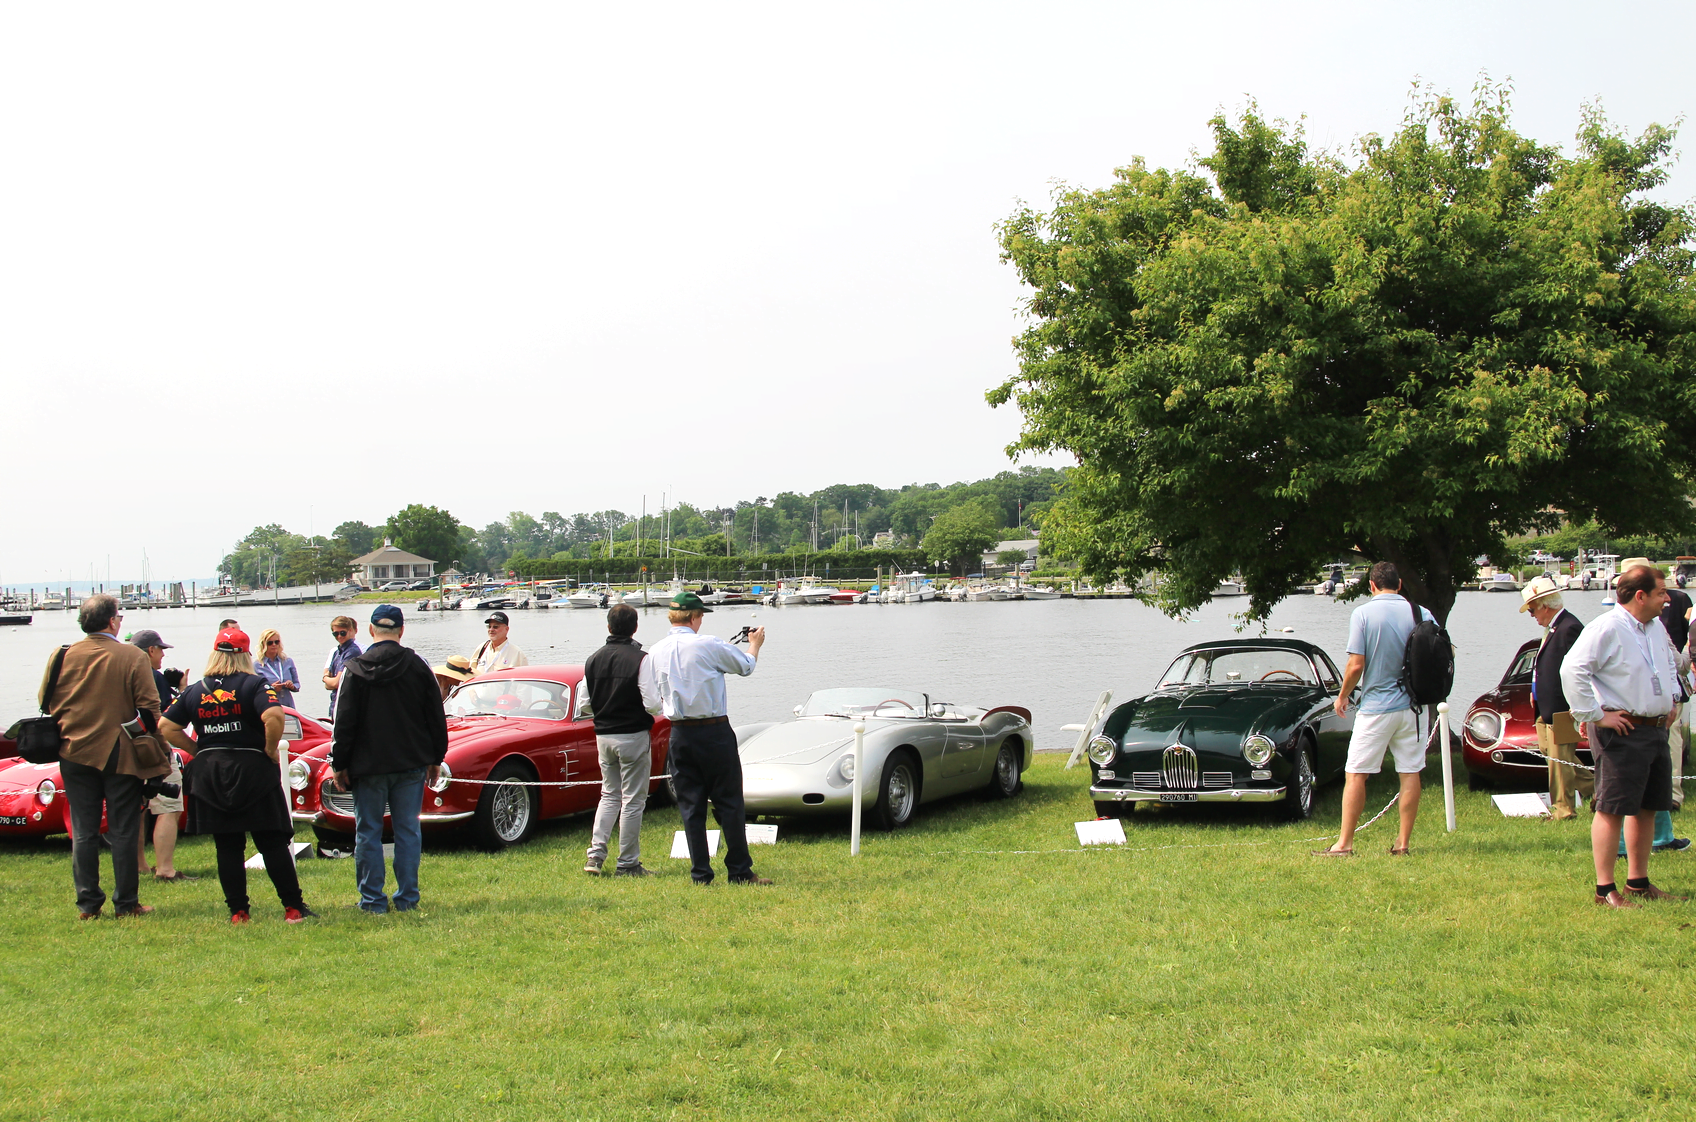 The Greenwich Concours d’Elegance ran two days, June 1-2, 2019. On Saturday the show featured American cars. Photo: Leslie Yager